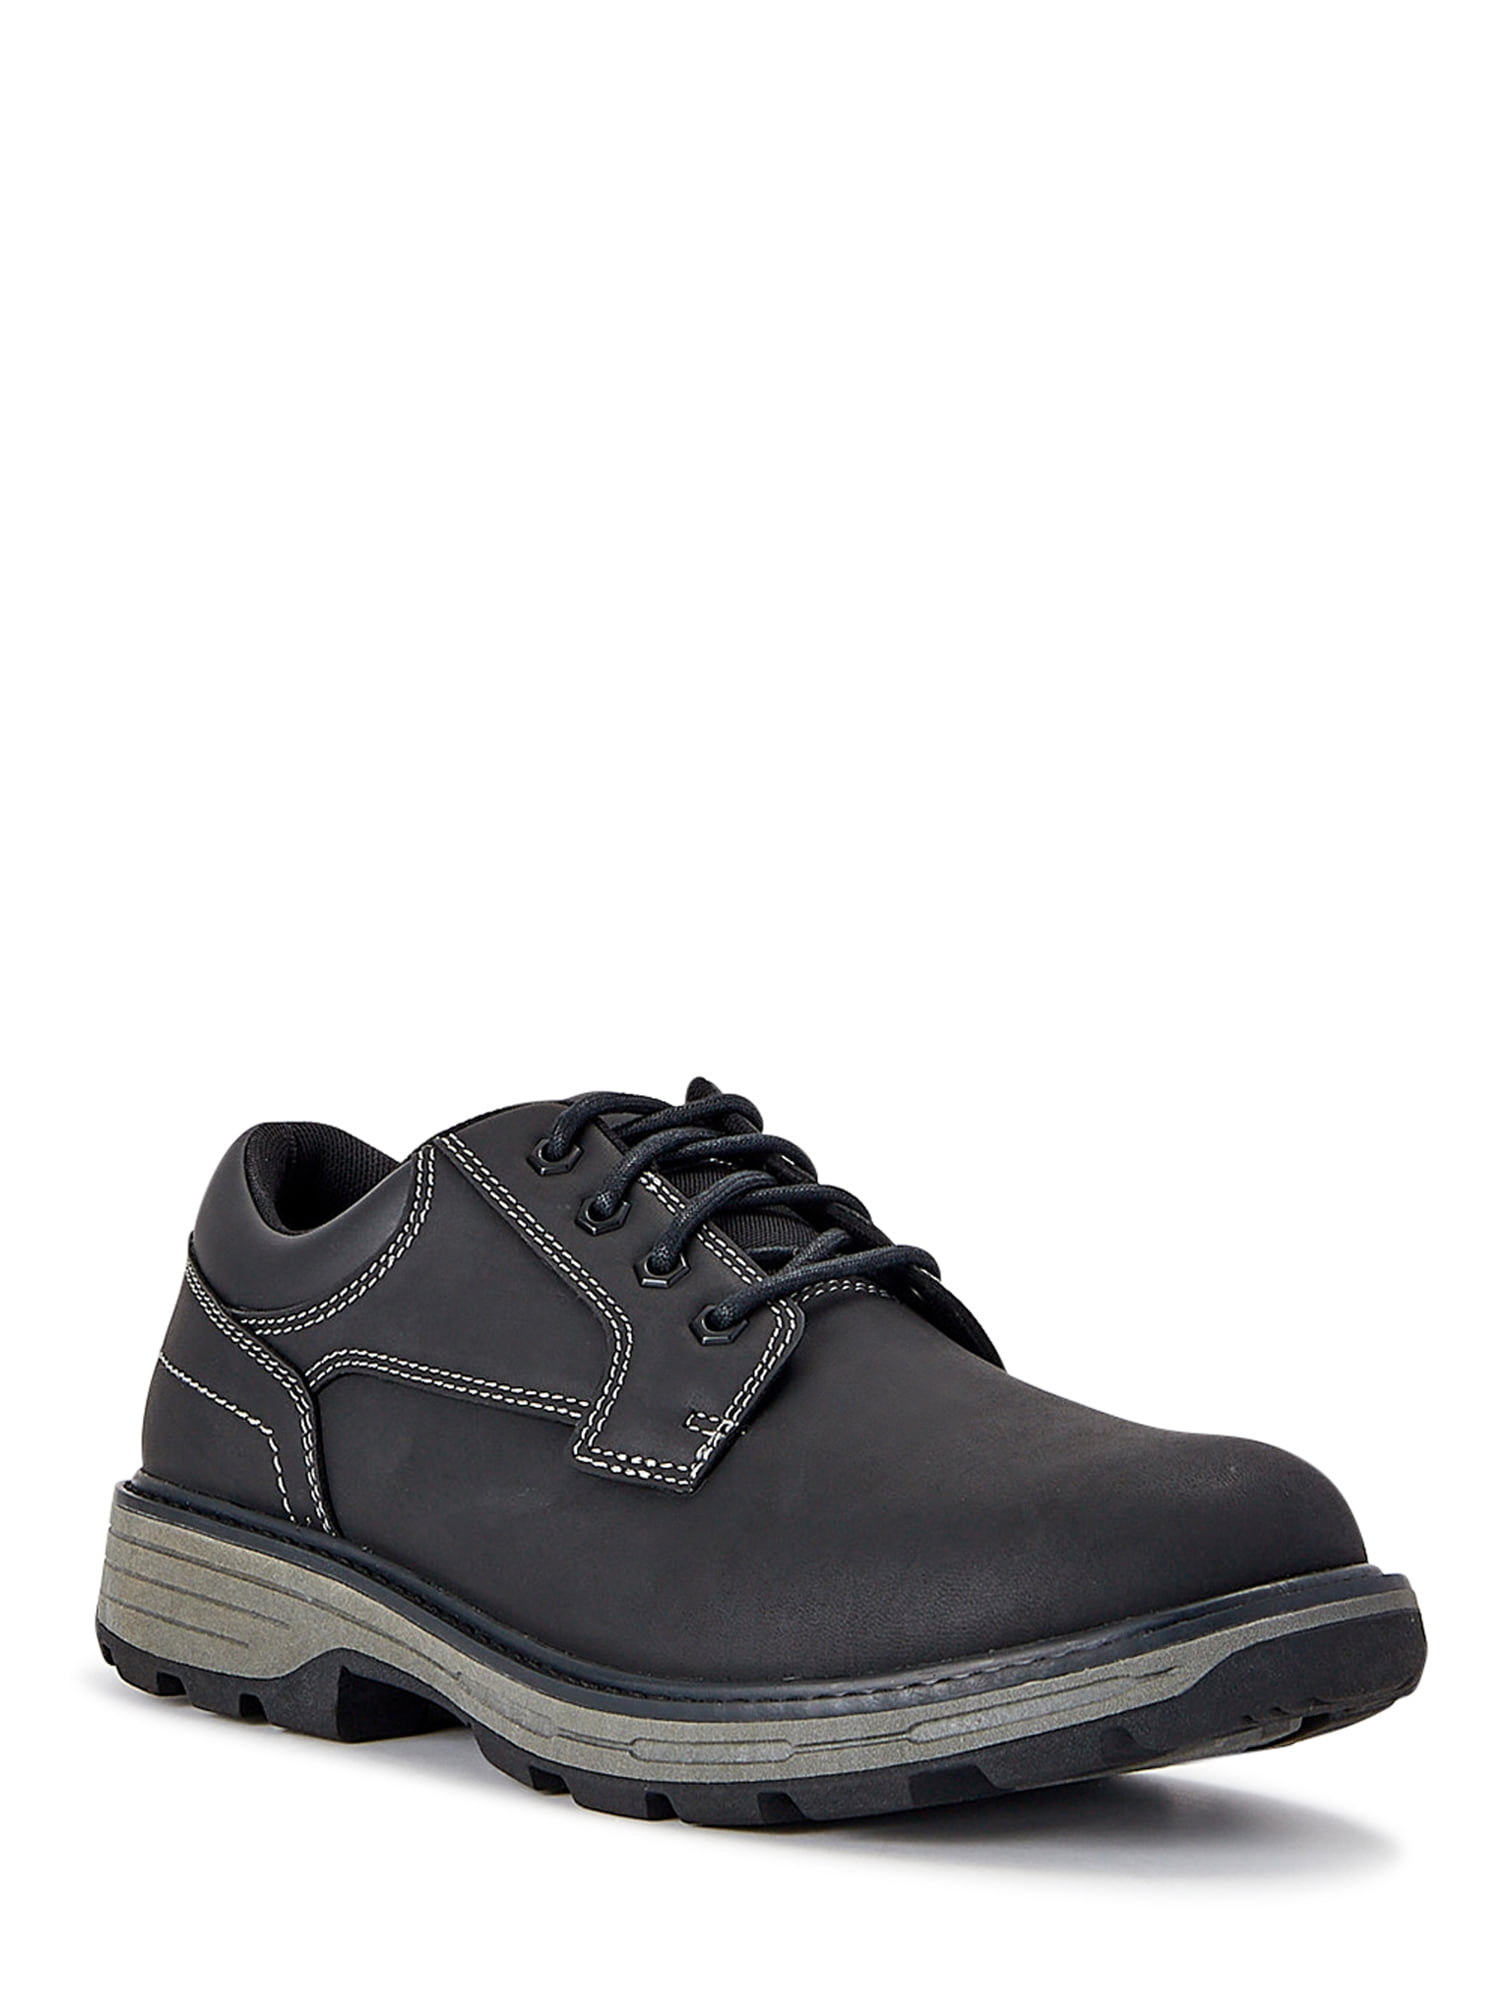 George Men's Markos Rugged Casual Lace-Ups